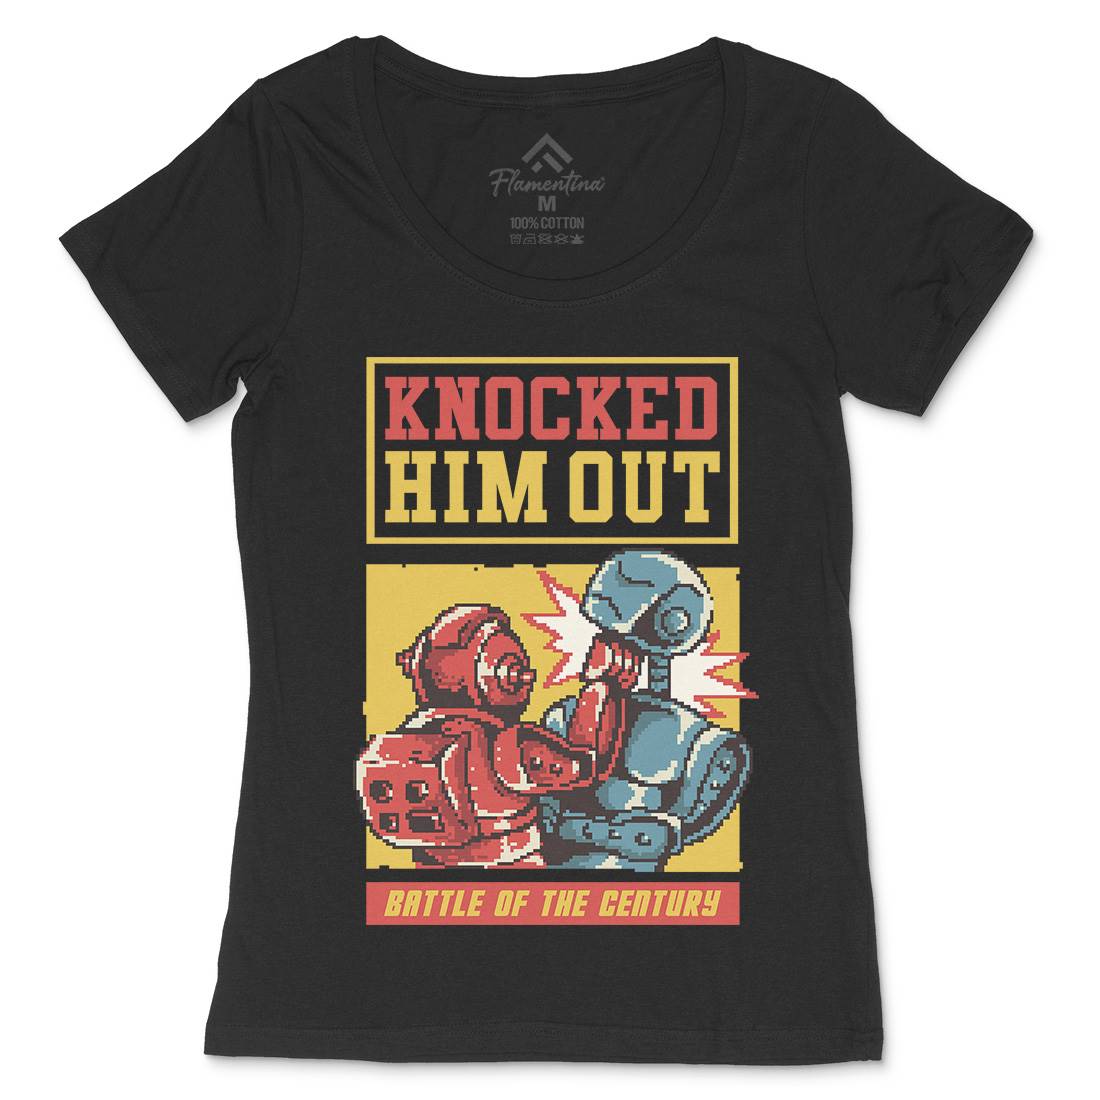 Knocked Him Out Womens Scoop Neck T-Shirt Space B923